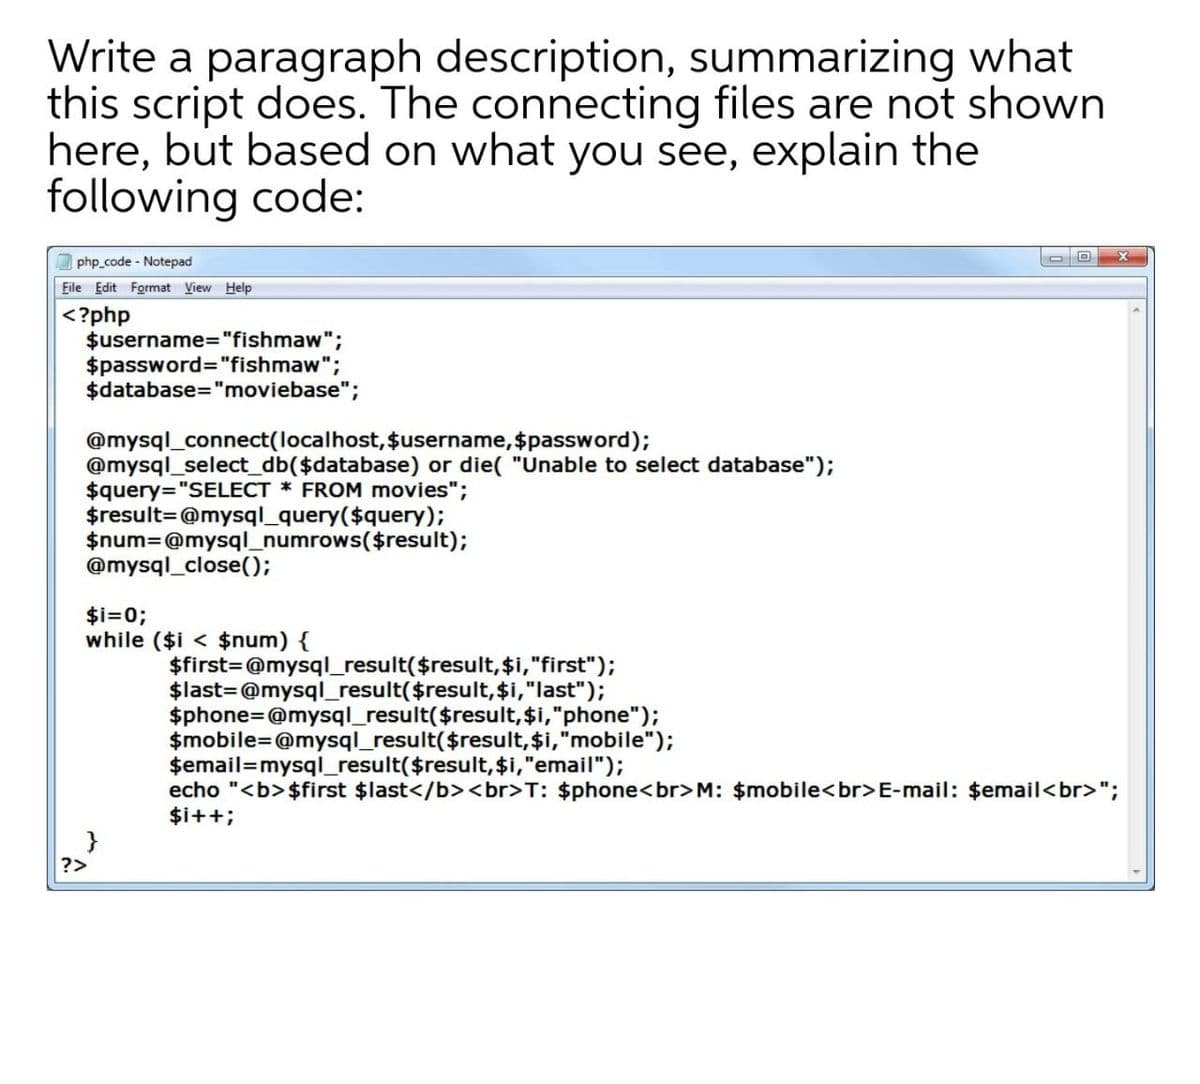 Write a paragraph description, summarizing what
this script does. The connecting files are not shown
here, but based on what you see, explain the
following code:
php code - Notepad
Eile Edit Format View Help
<?php
$username="fishmaw";
$password="fishmaw";
$database="moviebase";
@mysql_connect(localhost, $username, $password);
@mysql_select_db($database) or die( "Unable to select database");
$query="SELECT * FROM movies";
$result=@mysql_query($query);
$num=@mysql_numrows($result);
@mysql_close();
$i=0;
while ($i < $num) {
$first=@mysql_result($result, $i,"first");
$last=@mysql_result($result,$i,"last");
$phone=@mysql_result($result,$i,"phone");
$mobile=@mysql_result($result,$i,"mobile");
$email=mysql_result($result, $i,"email");
echo "<b> $first $last</b><br>T: $phone<br> M: $mobile<br>E-mail: $email<br>";
$i++;
?>
